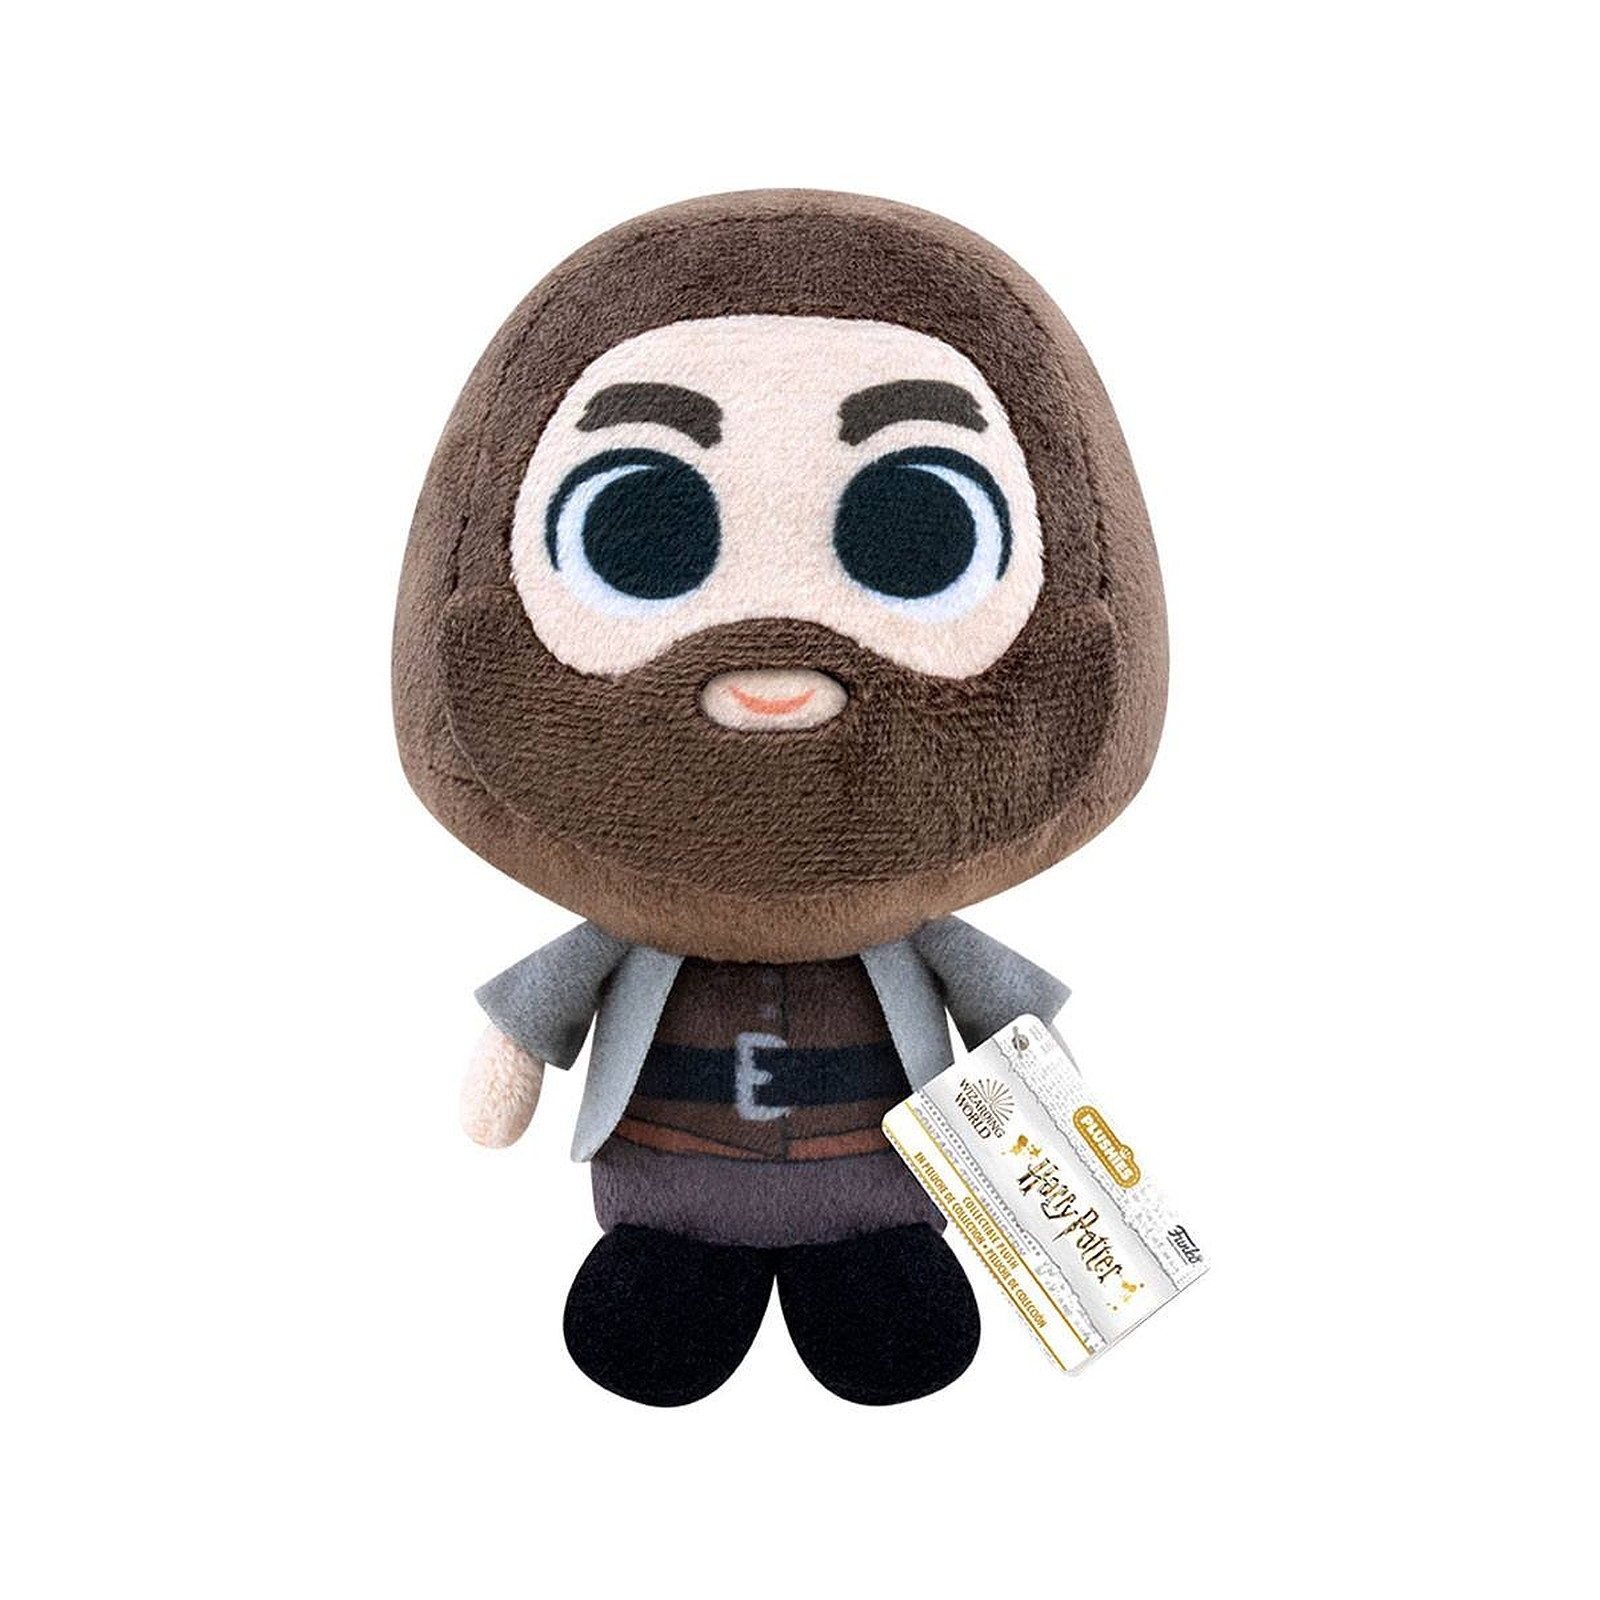 Harry Potter - Peluche Holiday Hagrid 10 cm - Peluches Funko